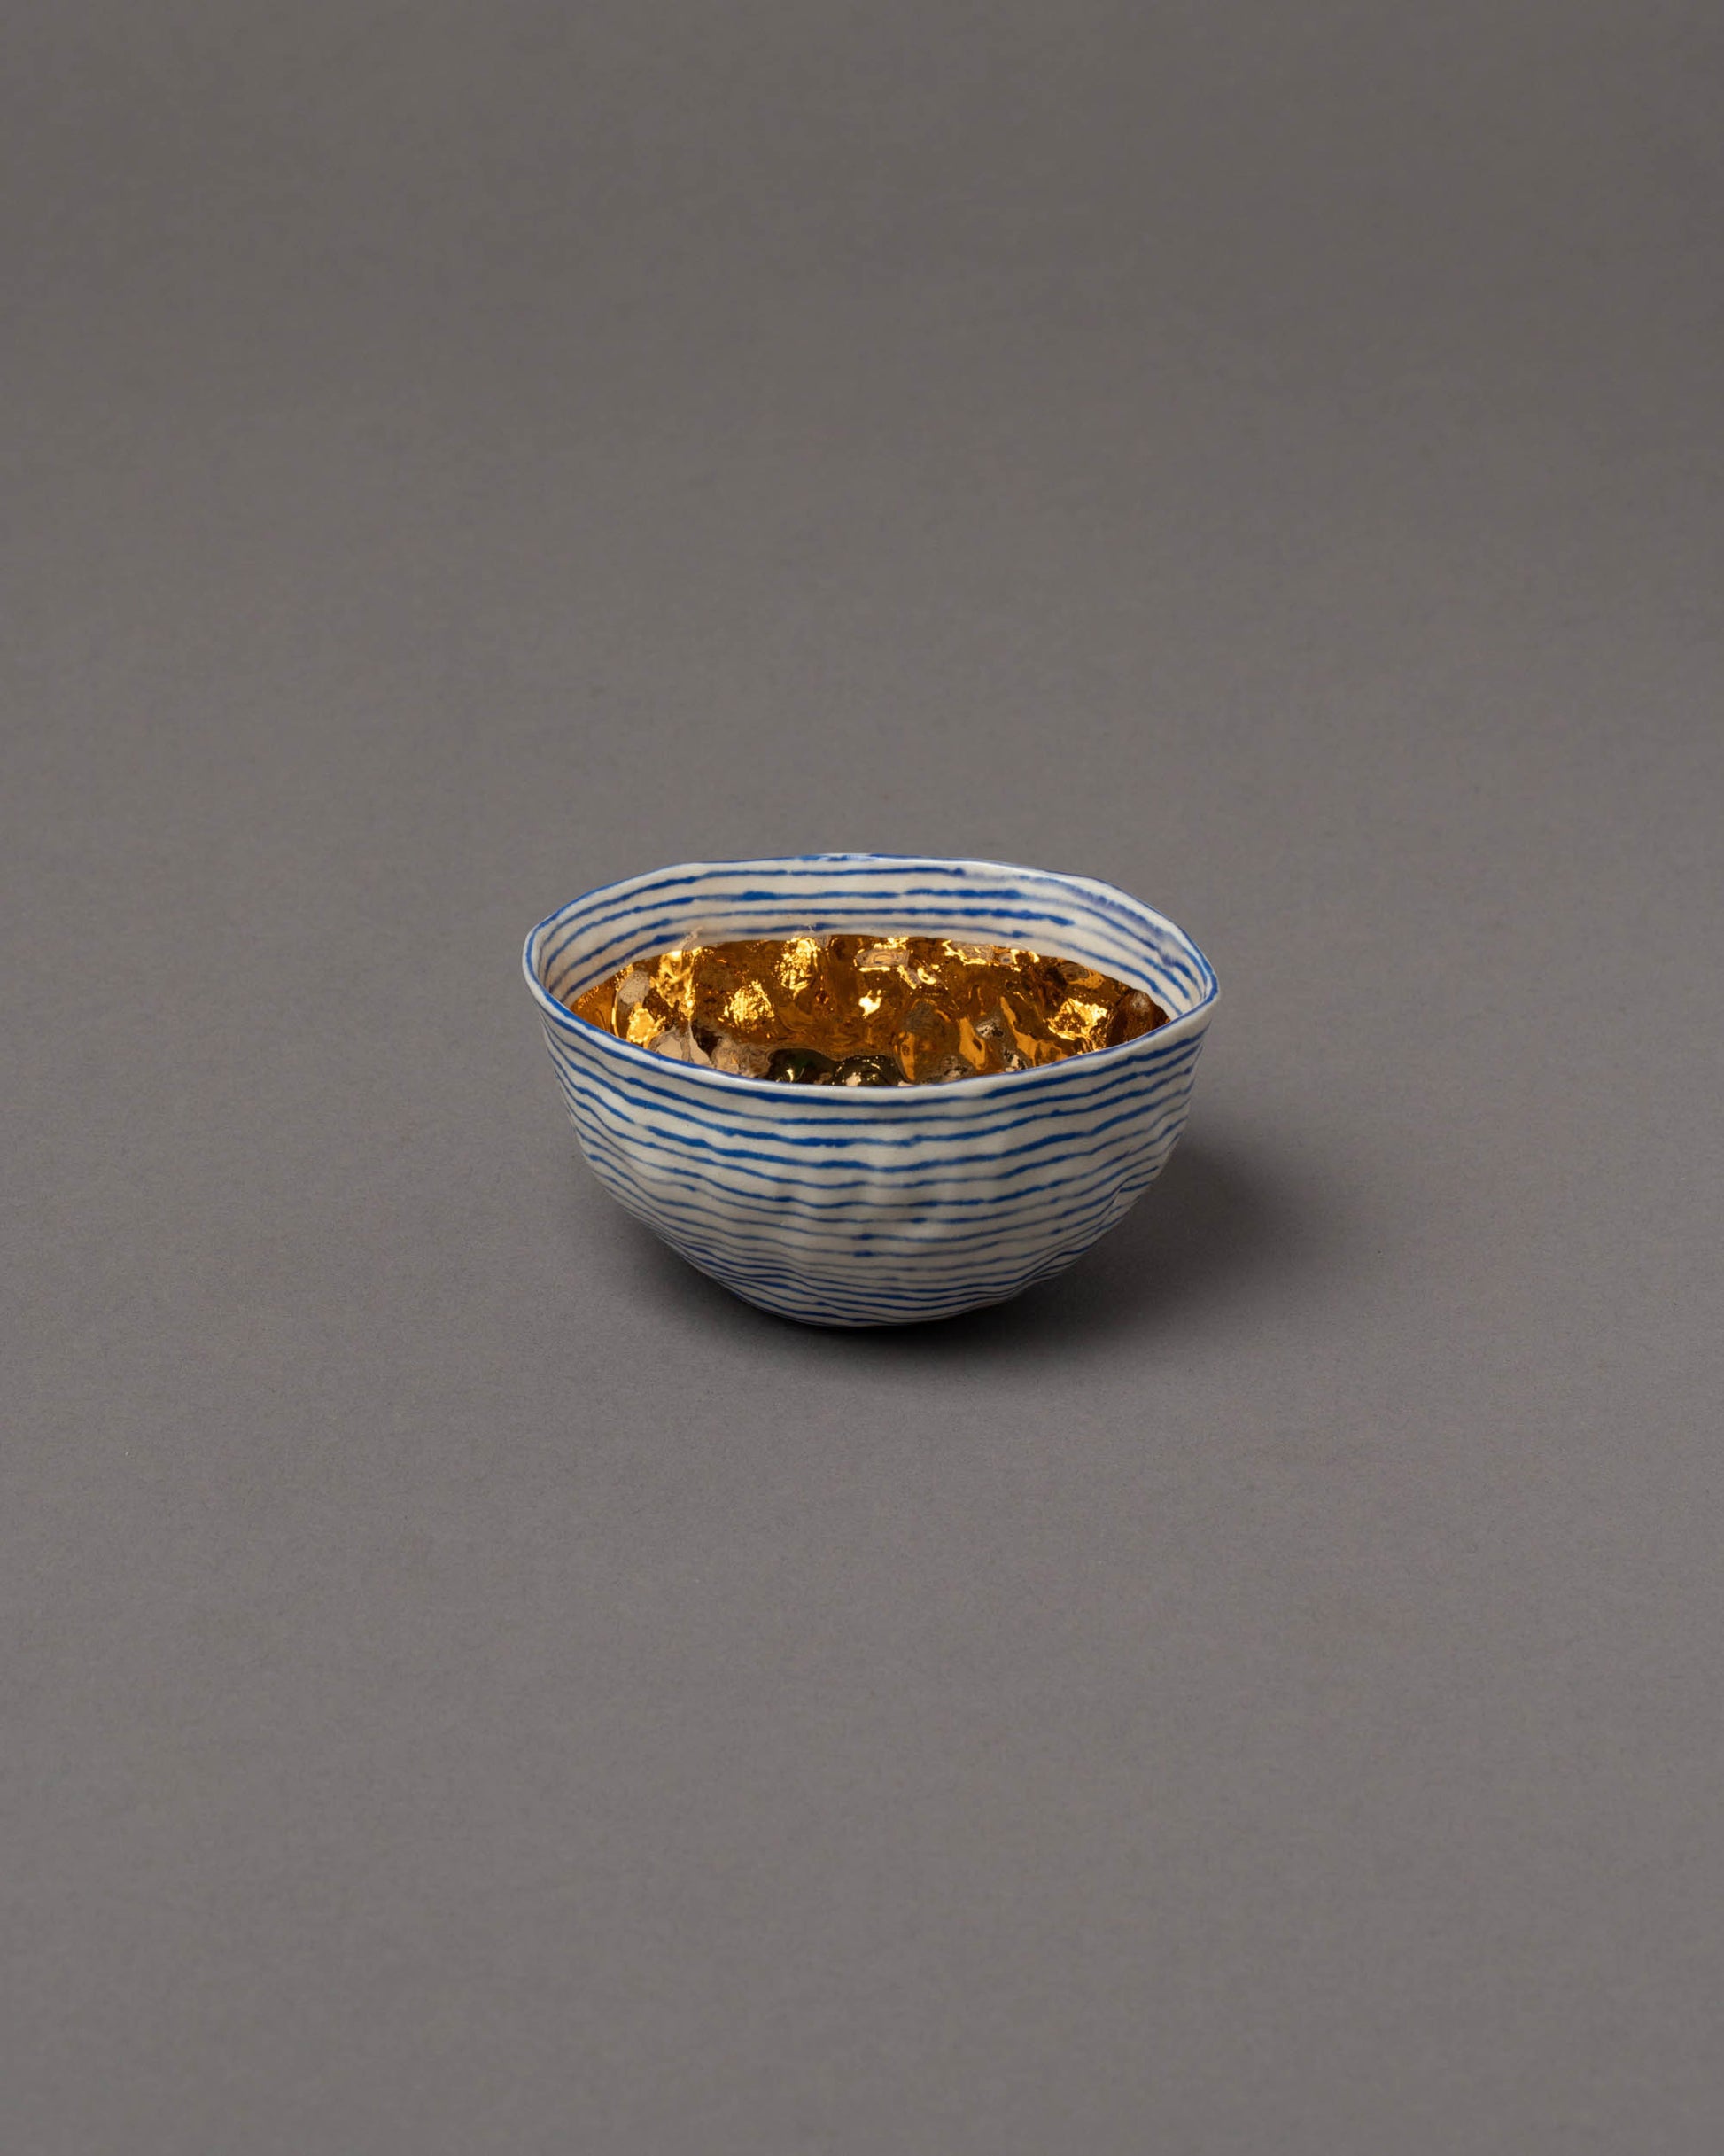 Suzanne Sullivan Minimizes Interference Considering Utility Royal Bowl on grey color background.